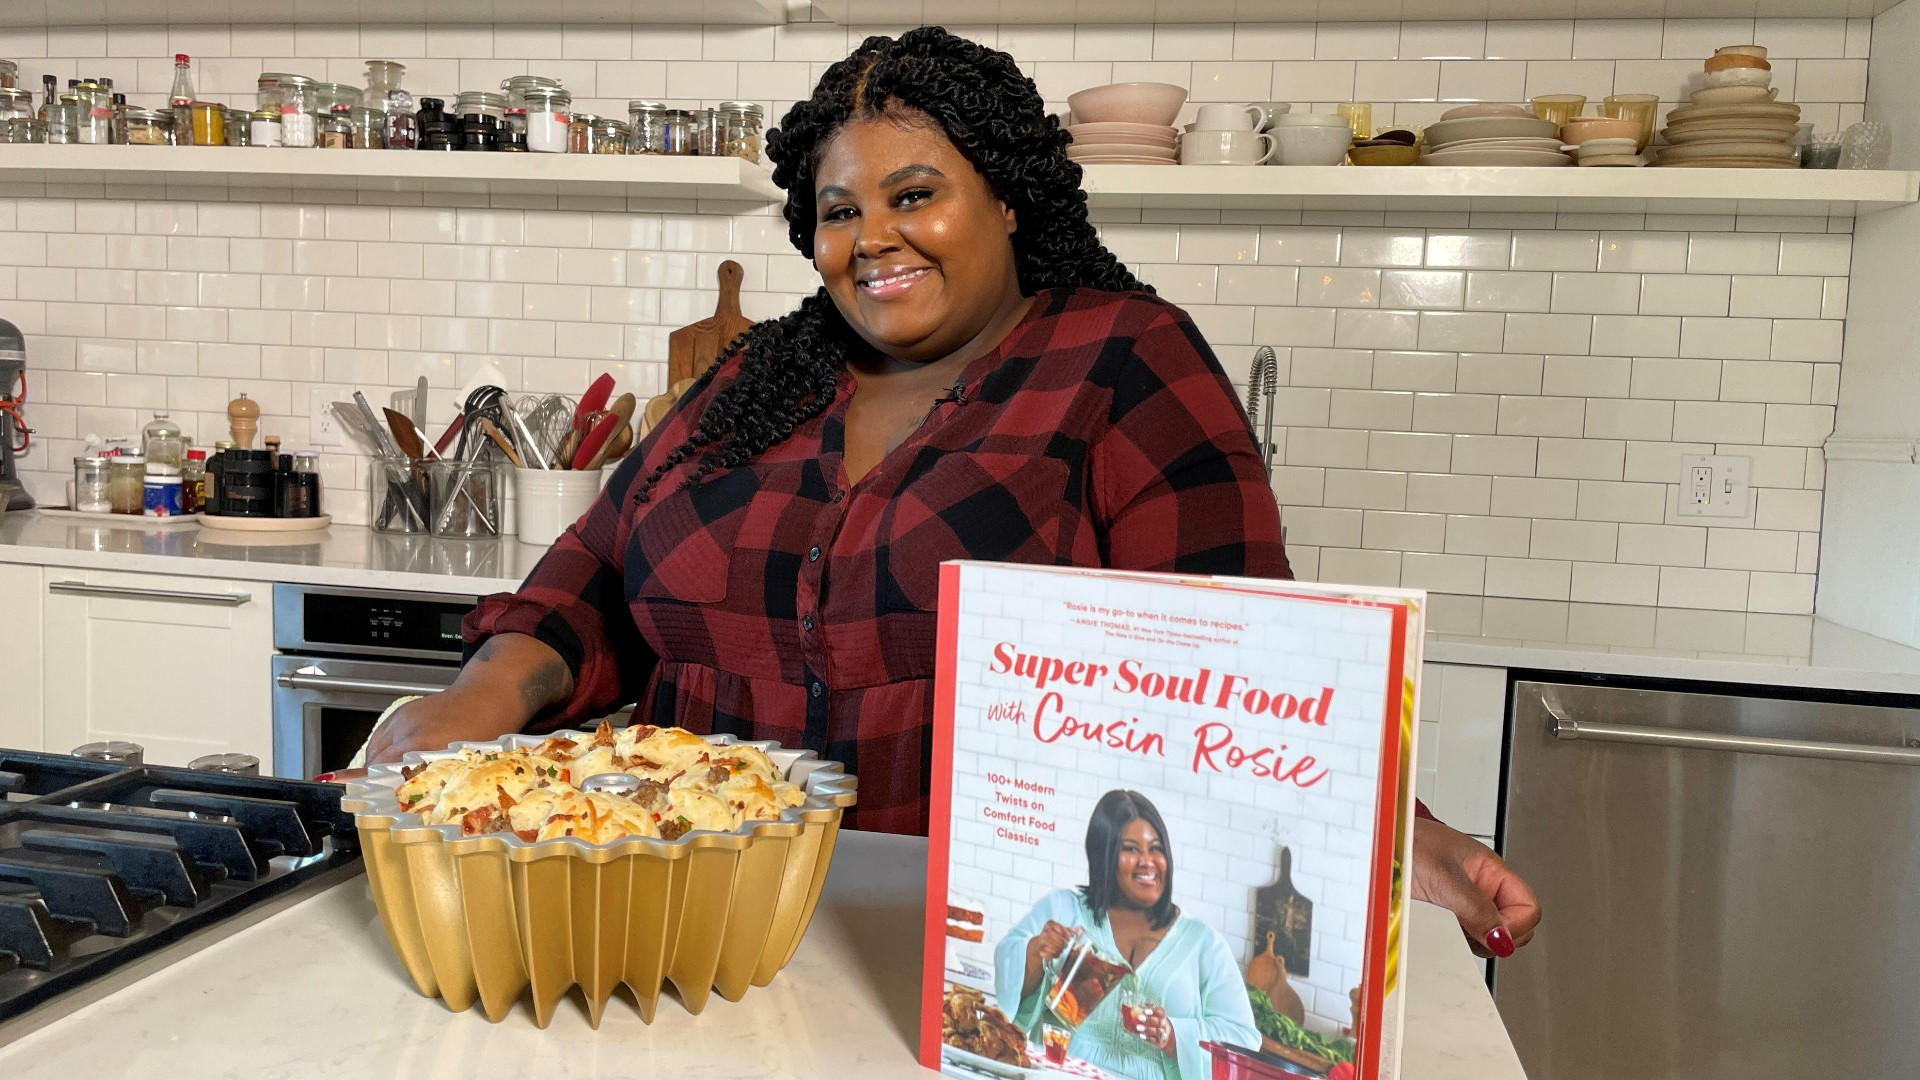 "Super Soul Food with Cousin Rosie" is Rosie Mayes' latest cookbook. #k5evening